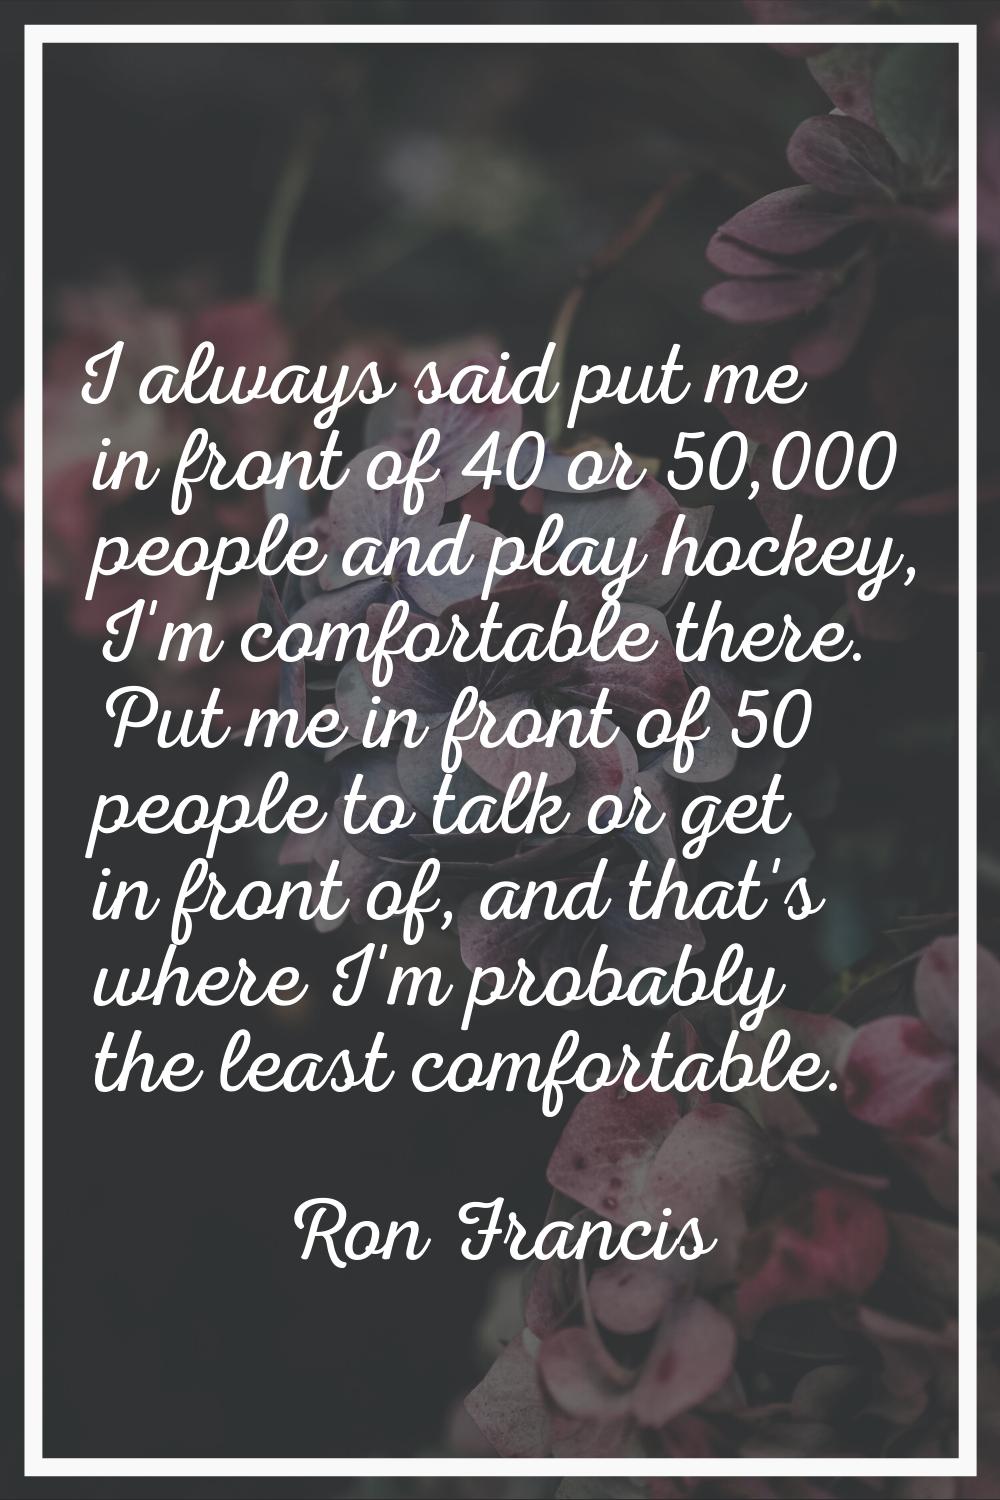 I always said put me in front of 40 or 50,000 people and play hockey, I'm comfortable there. Put me